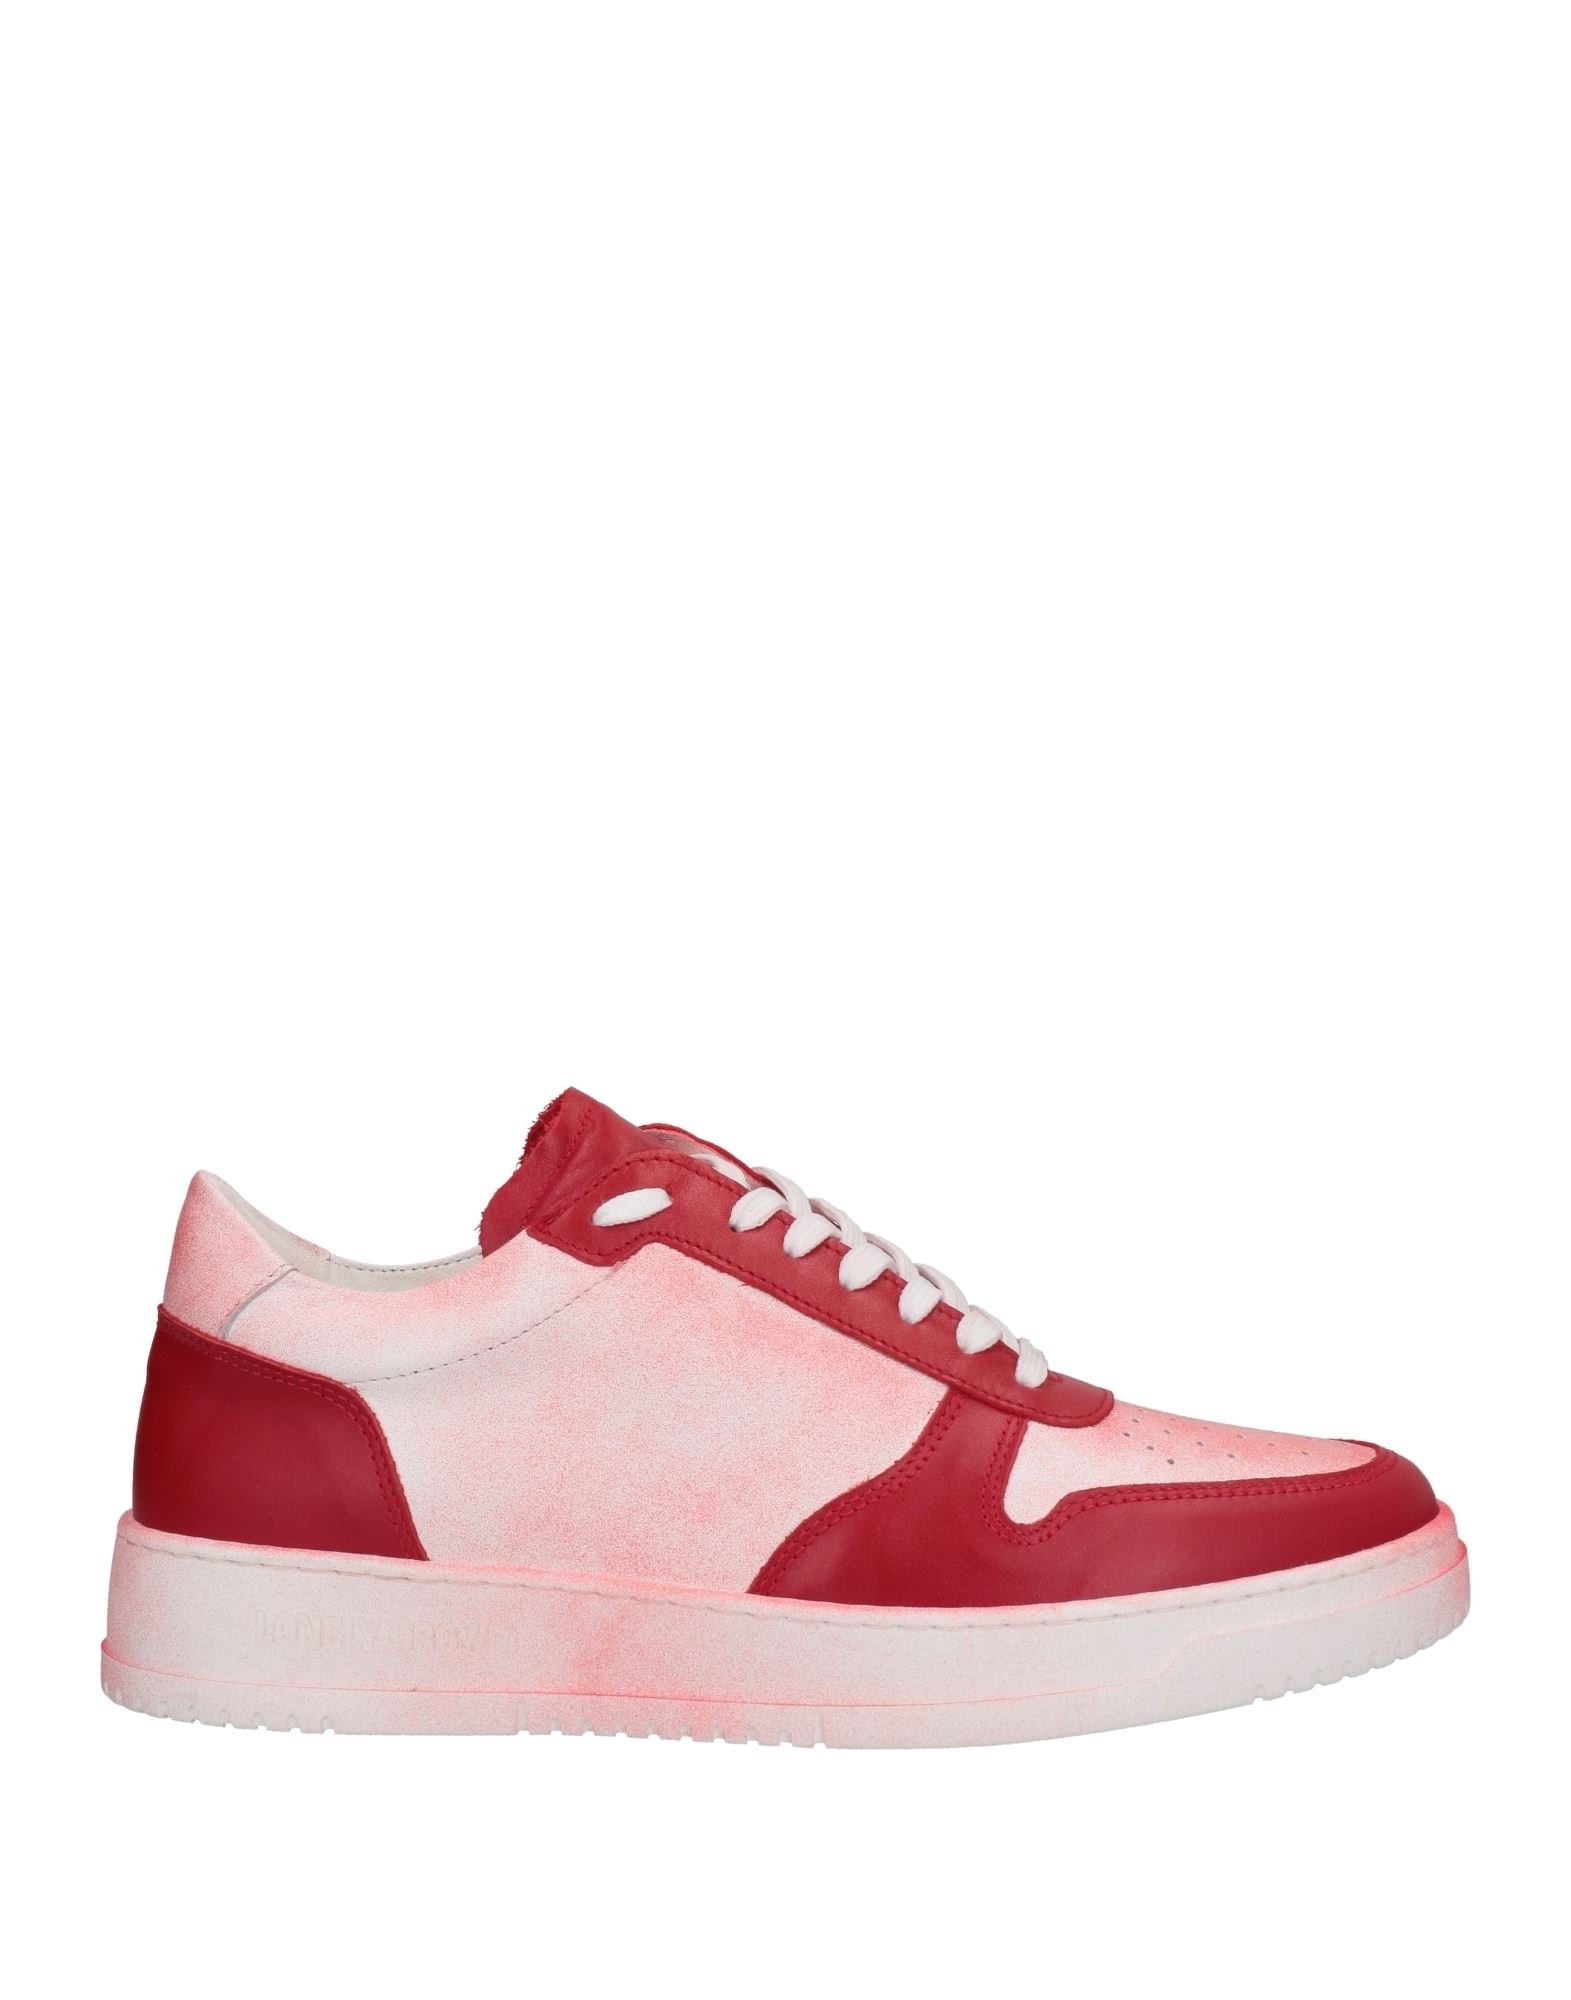 LONELY CROWD Sneakers Herren Rot von LONELY CROWD